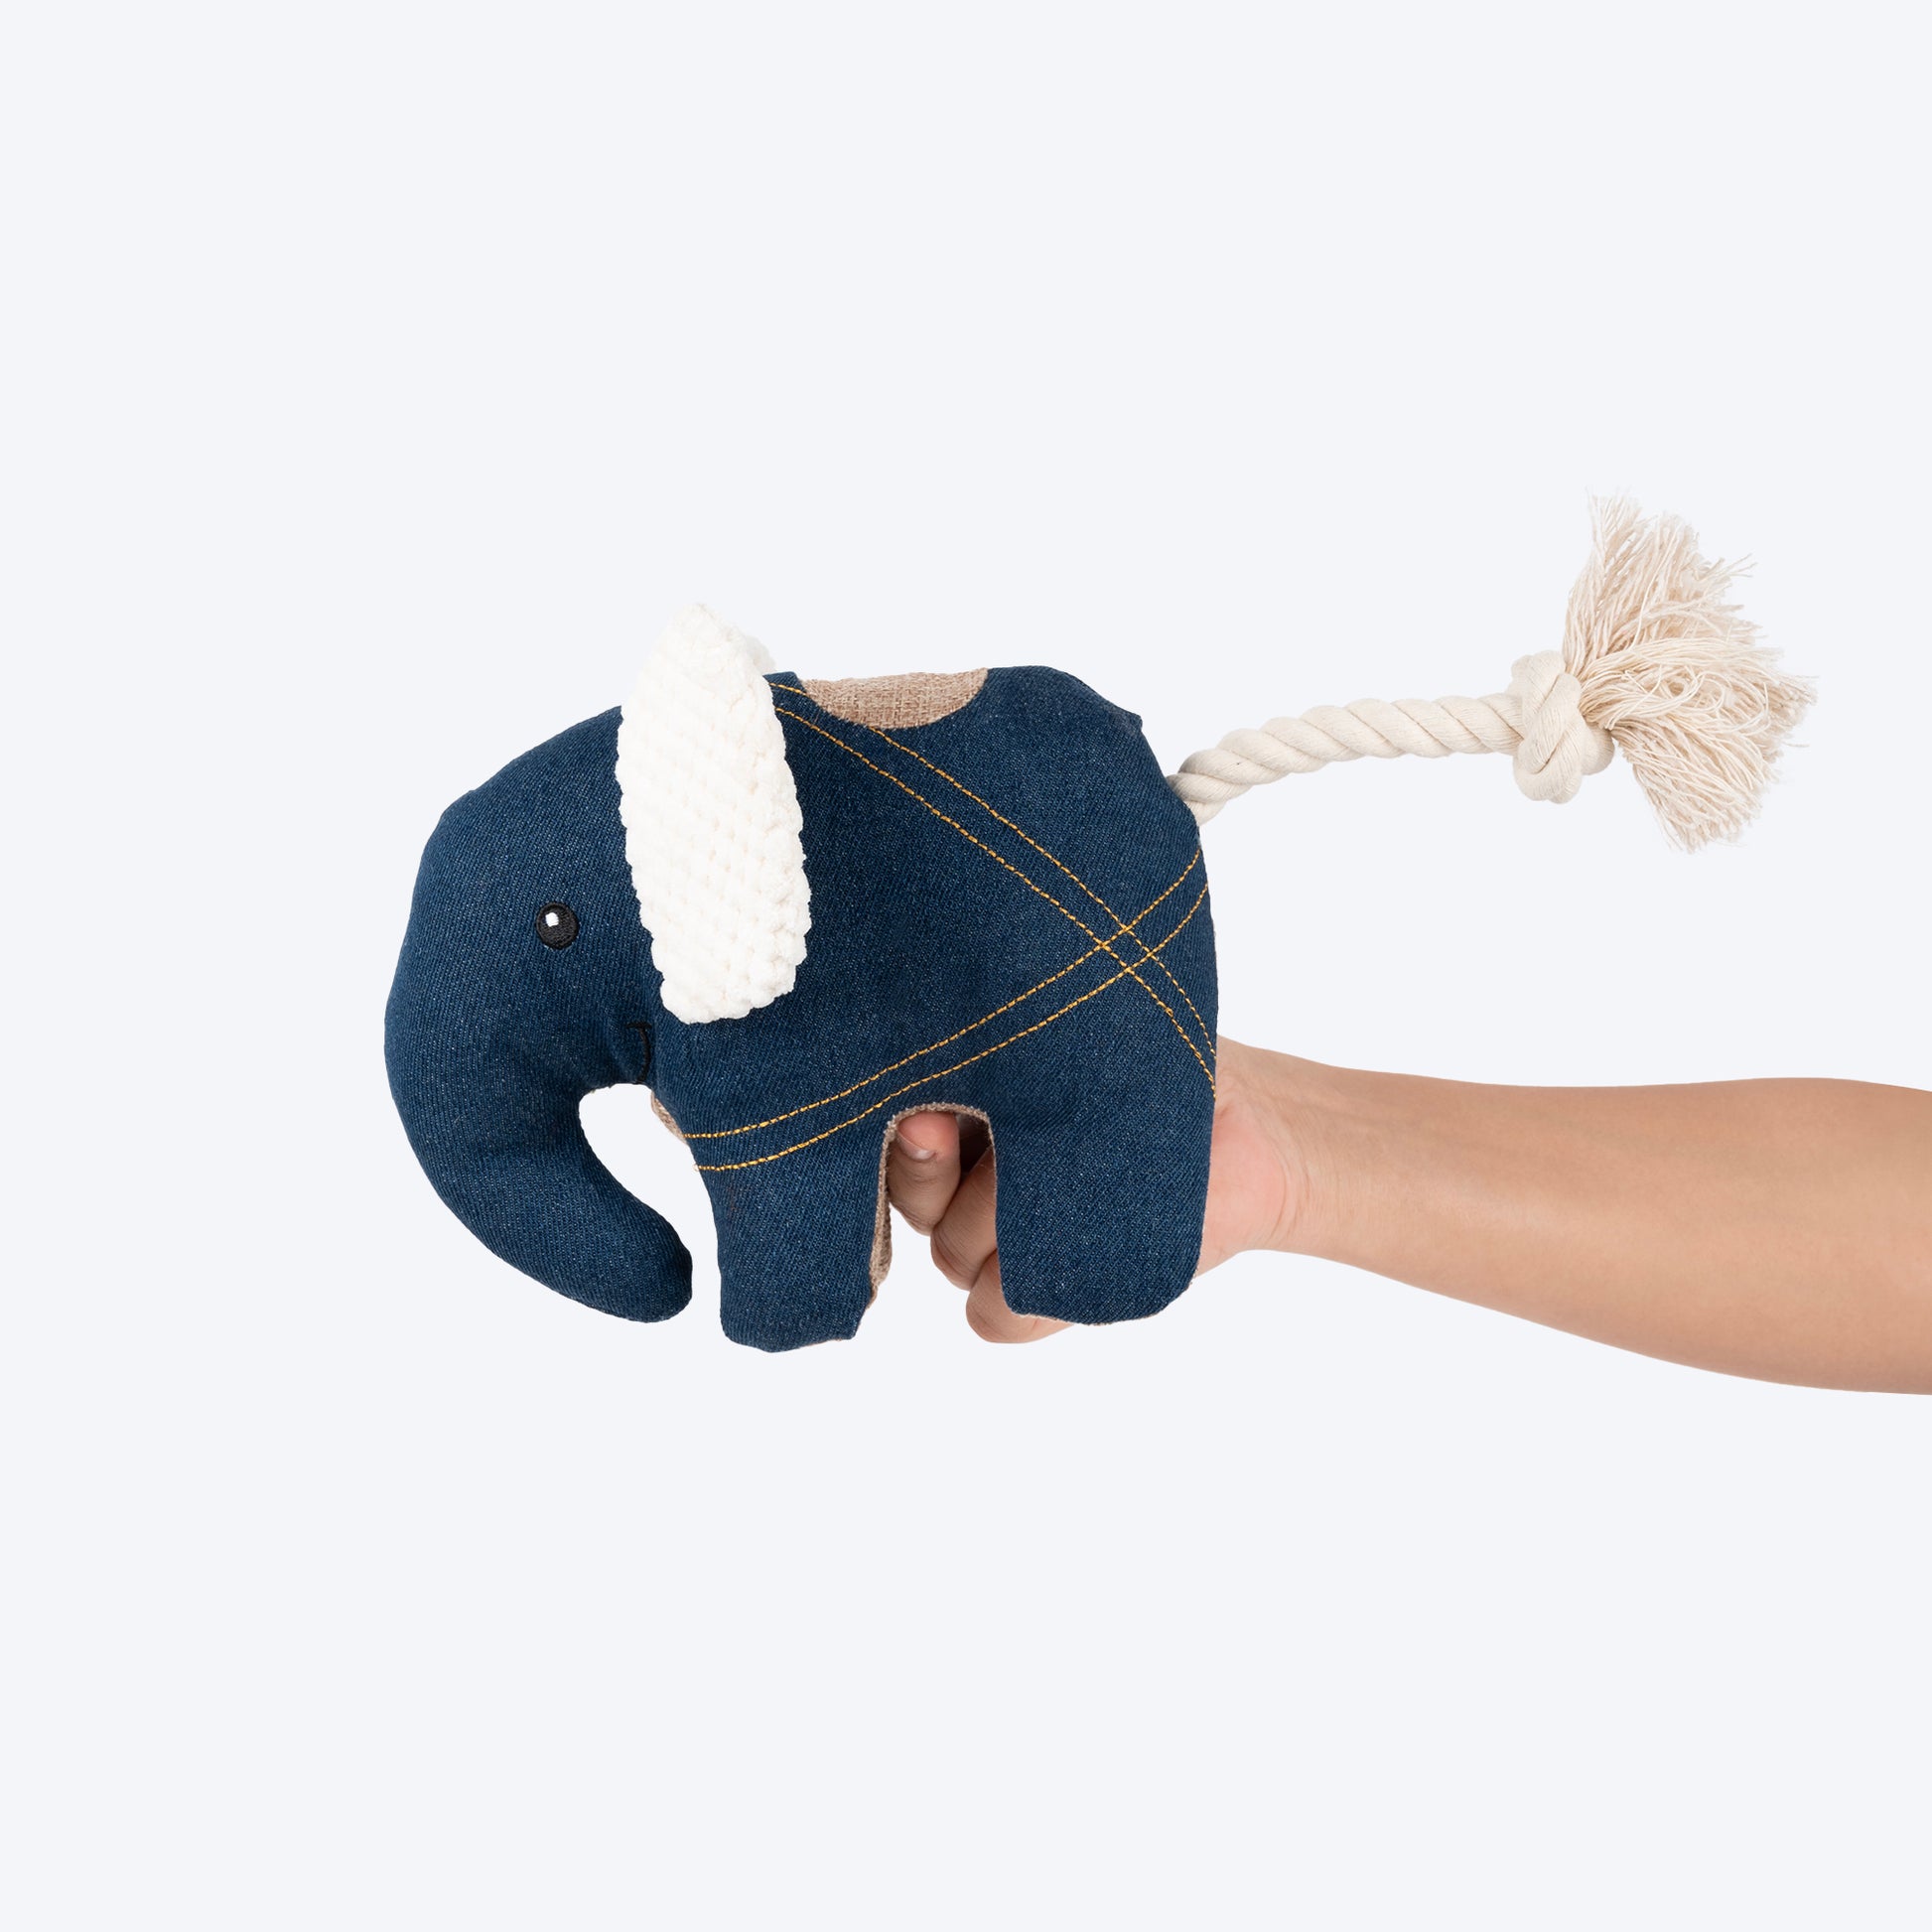 HUFT Jean Elephant With Rope Plush Toy For Dog - Navy Blue - Heads Up For Tails